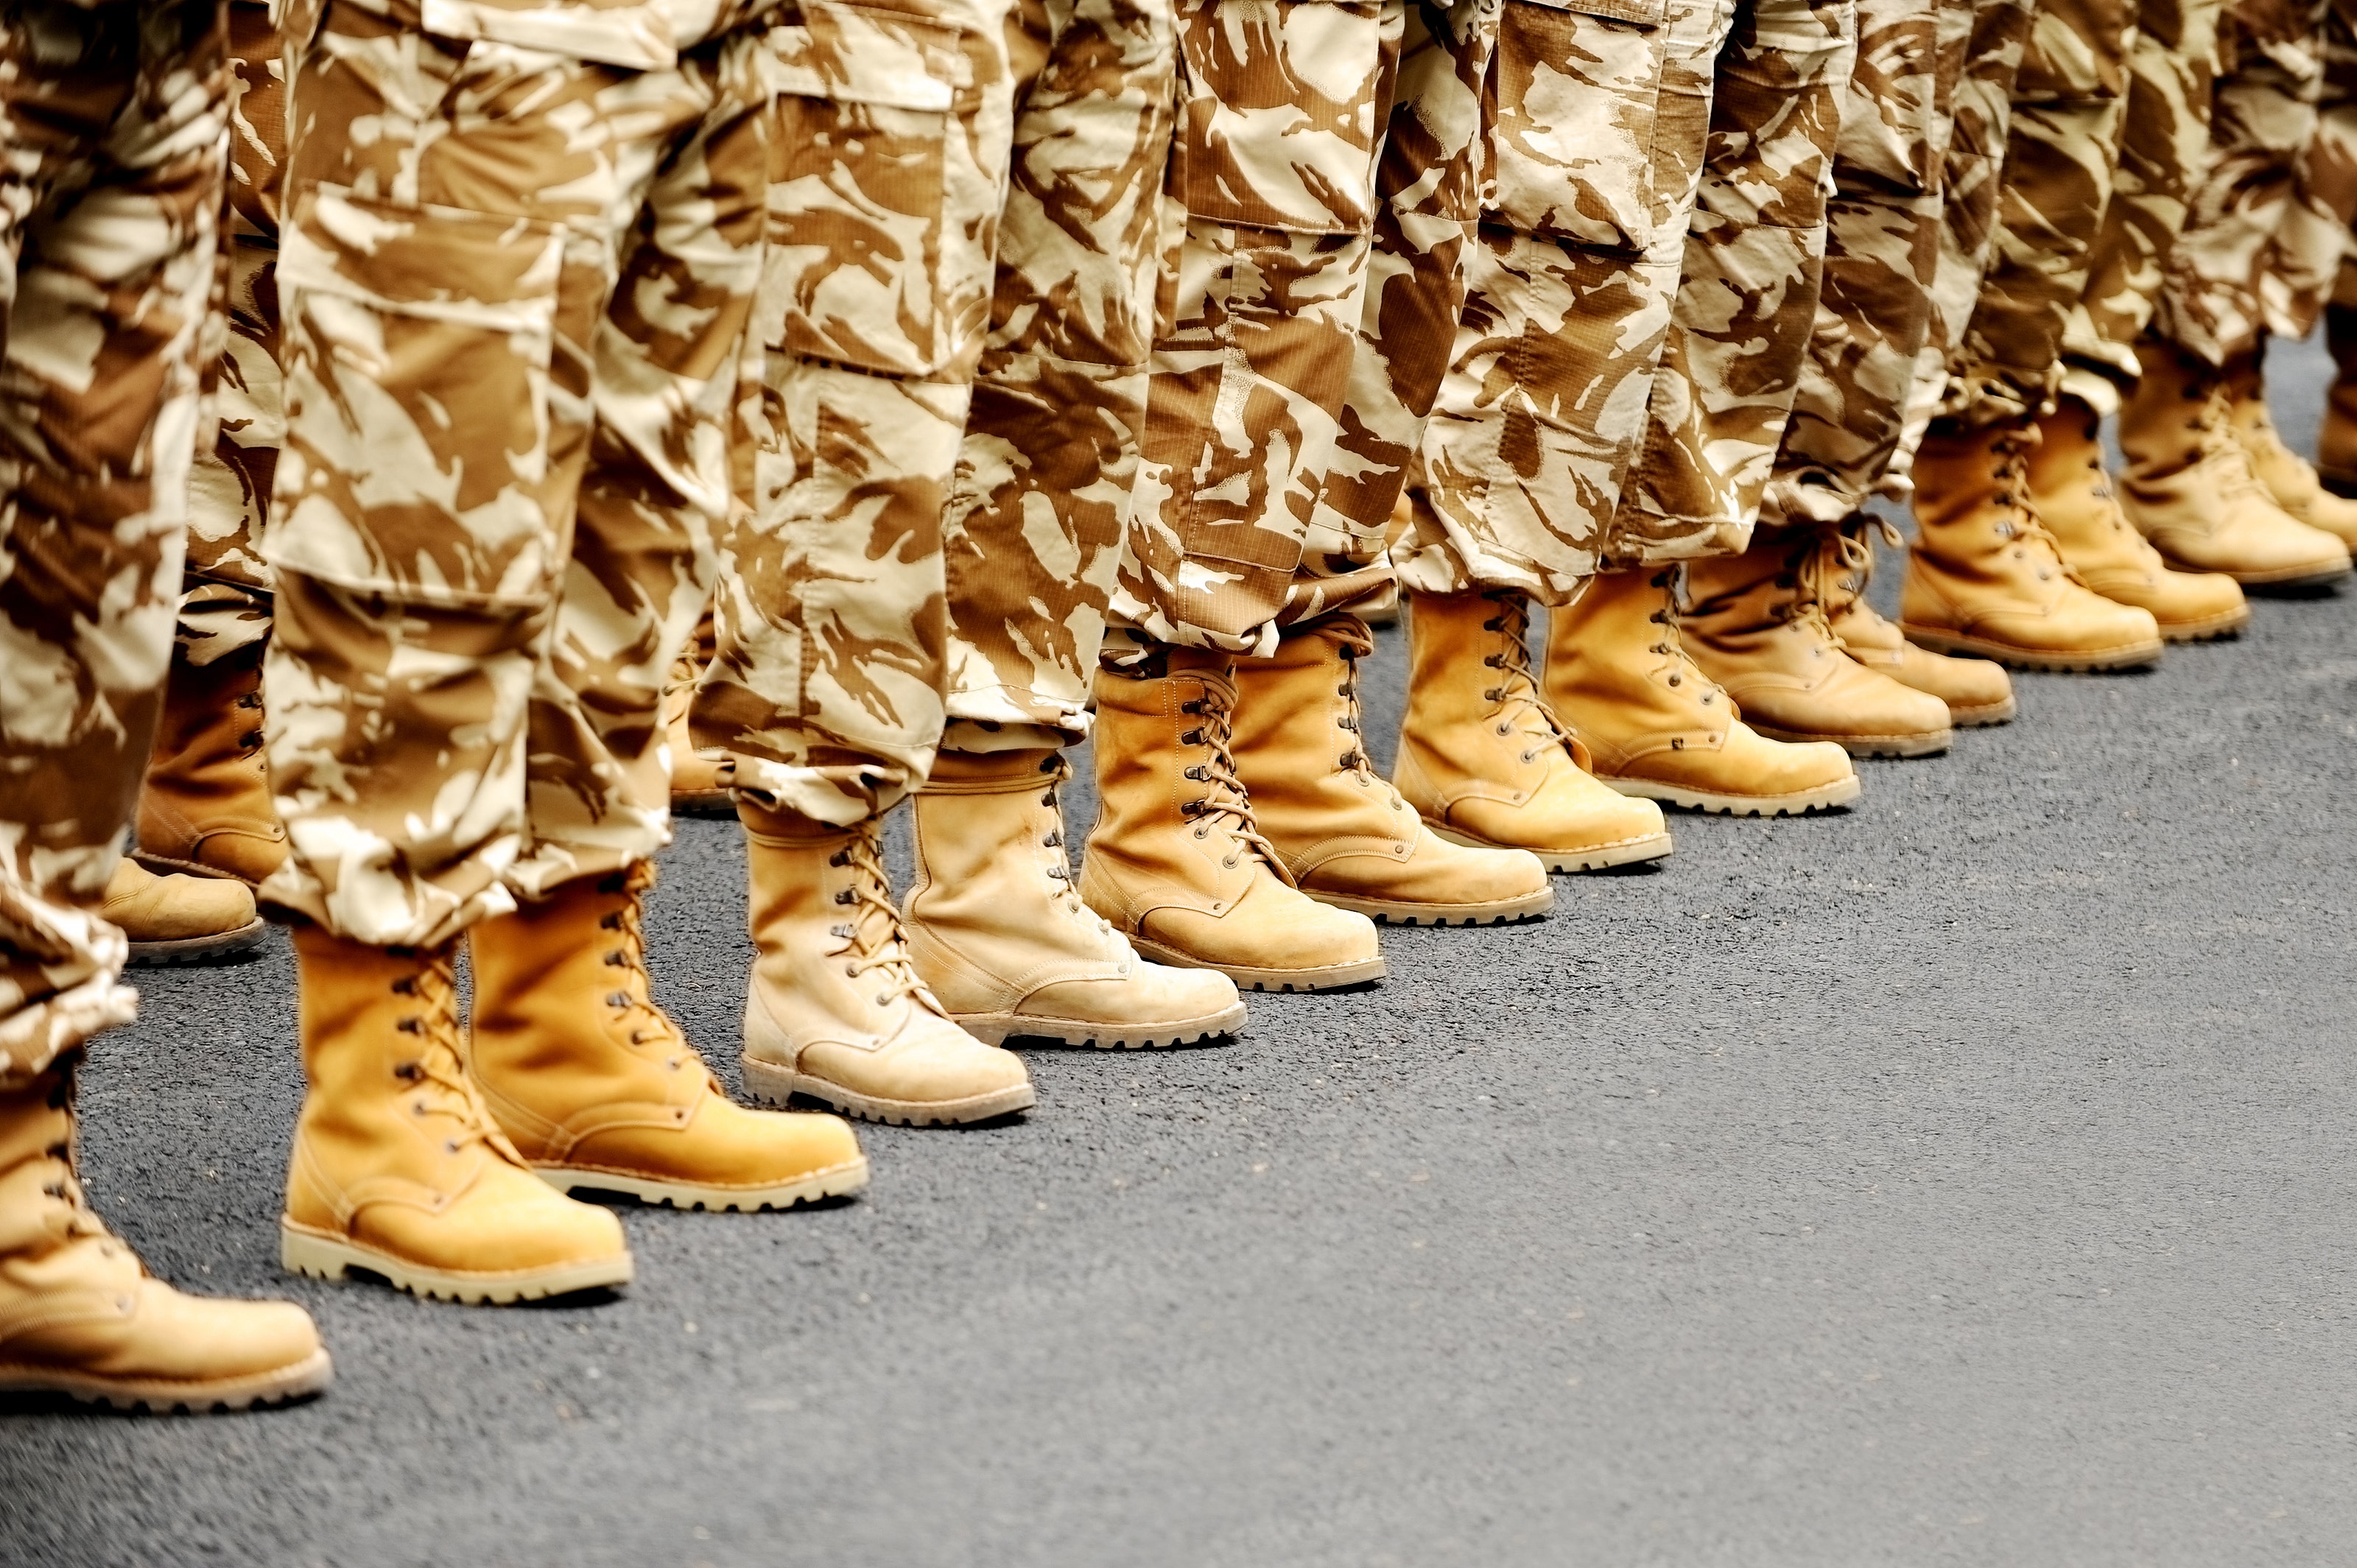 Veteran suicides are a national crisis, but there are ways to help our heroes